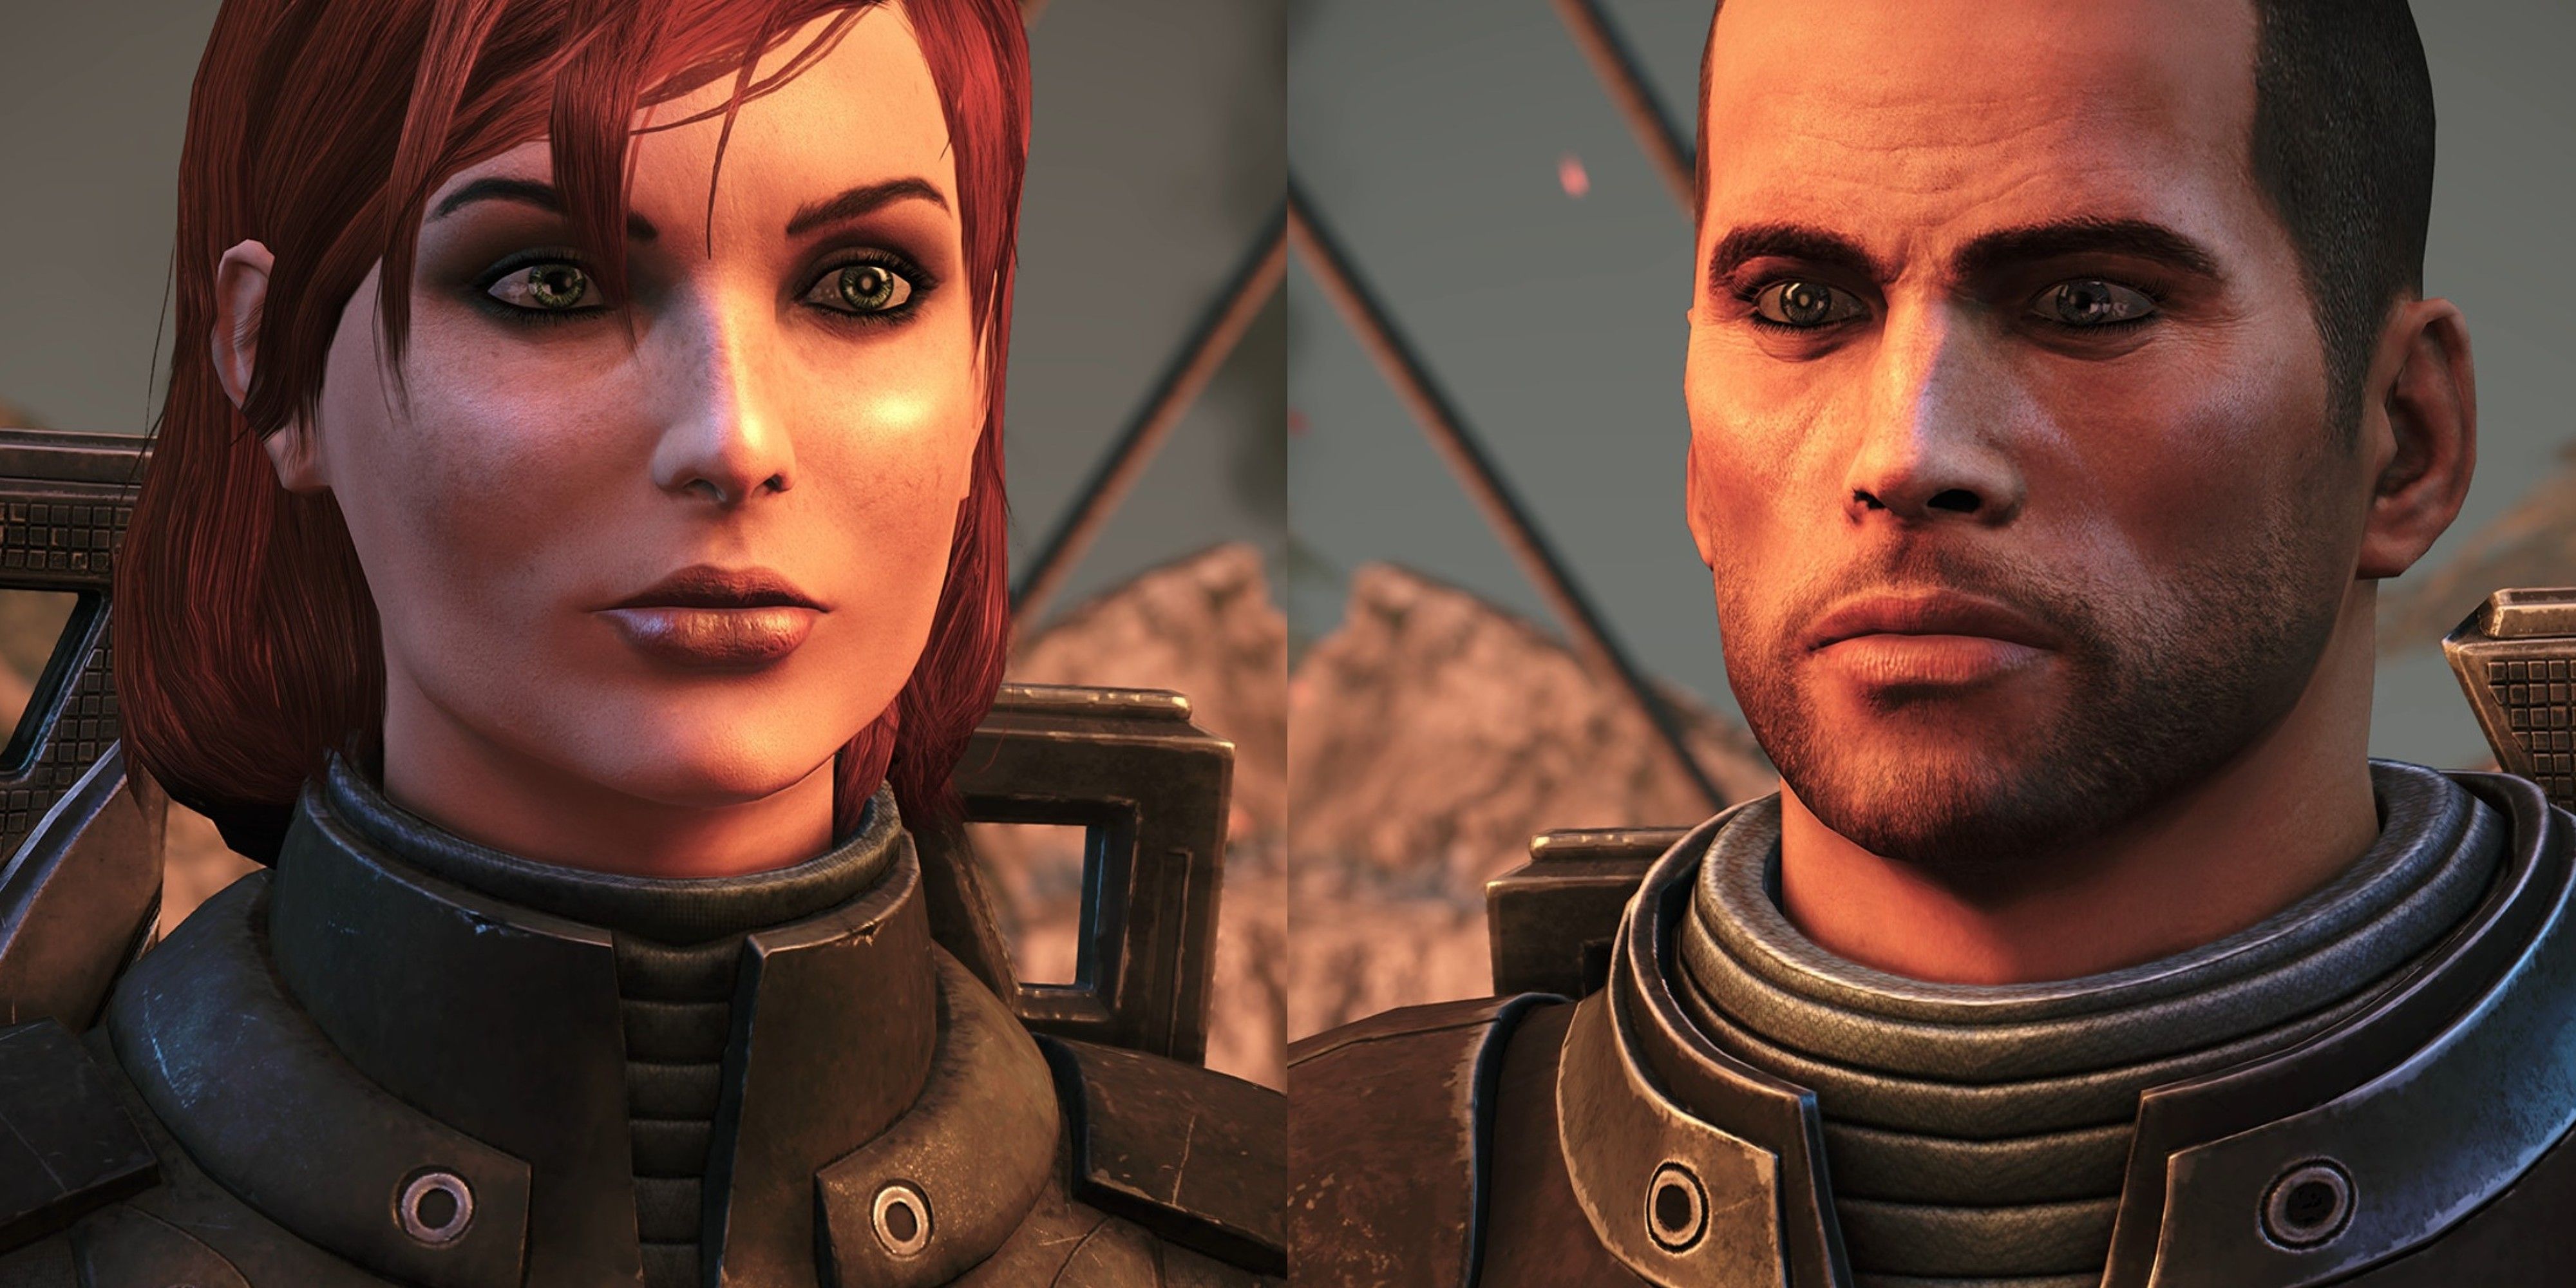 Commander Shepard Default Female and Male Versions in Mass Effect Legendary Edition